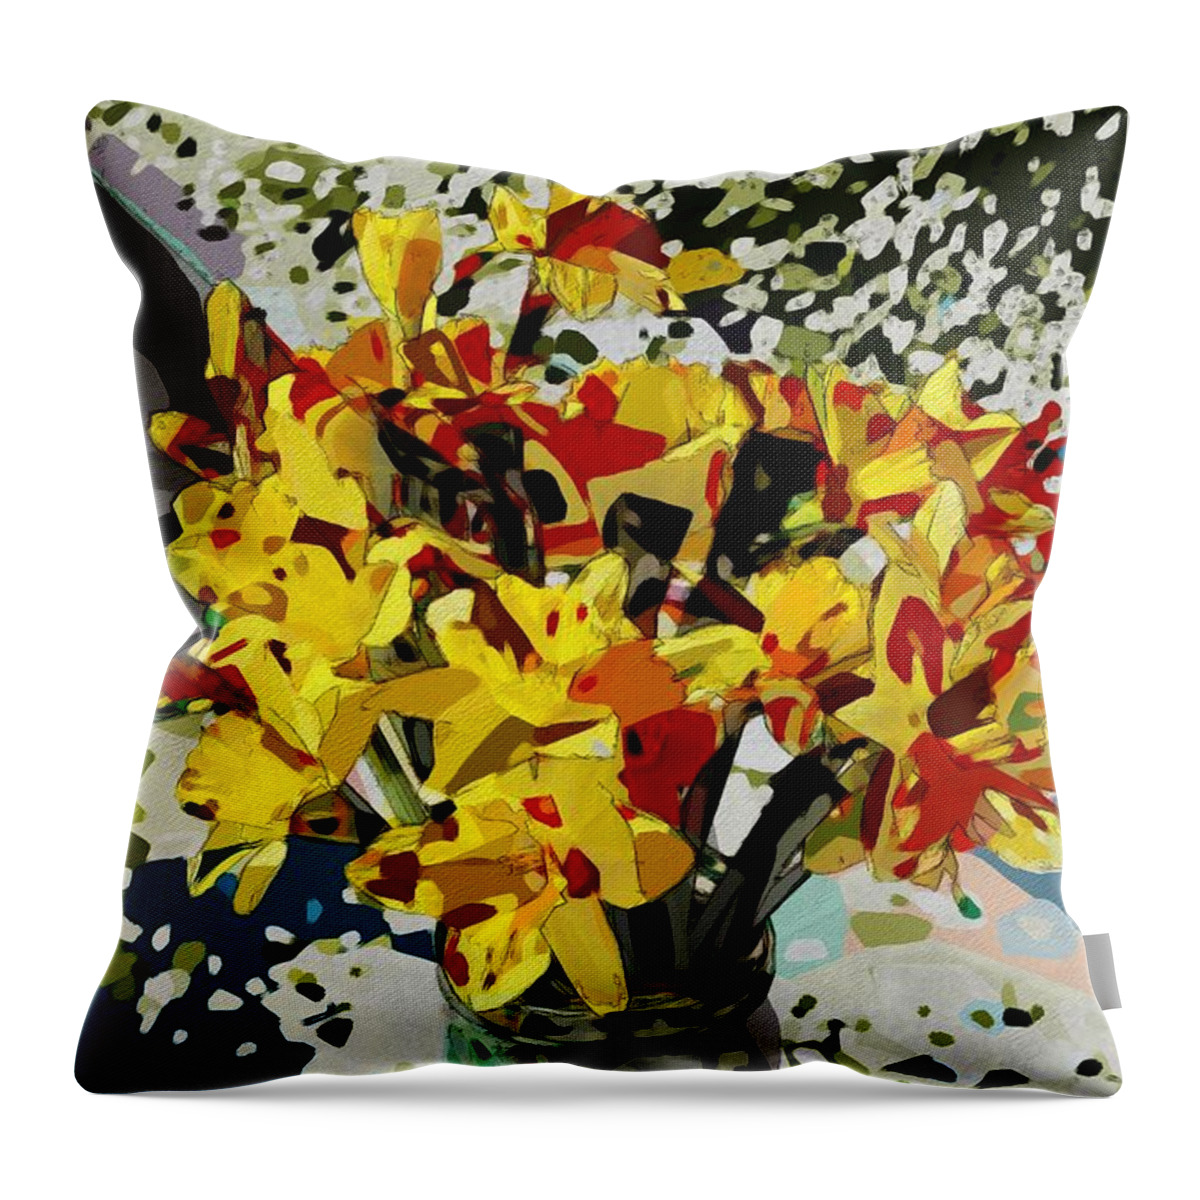 Daffodils Throw Pillow featuring the photograph Cubistic Daffodils by Katherine Erickson